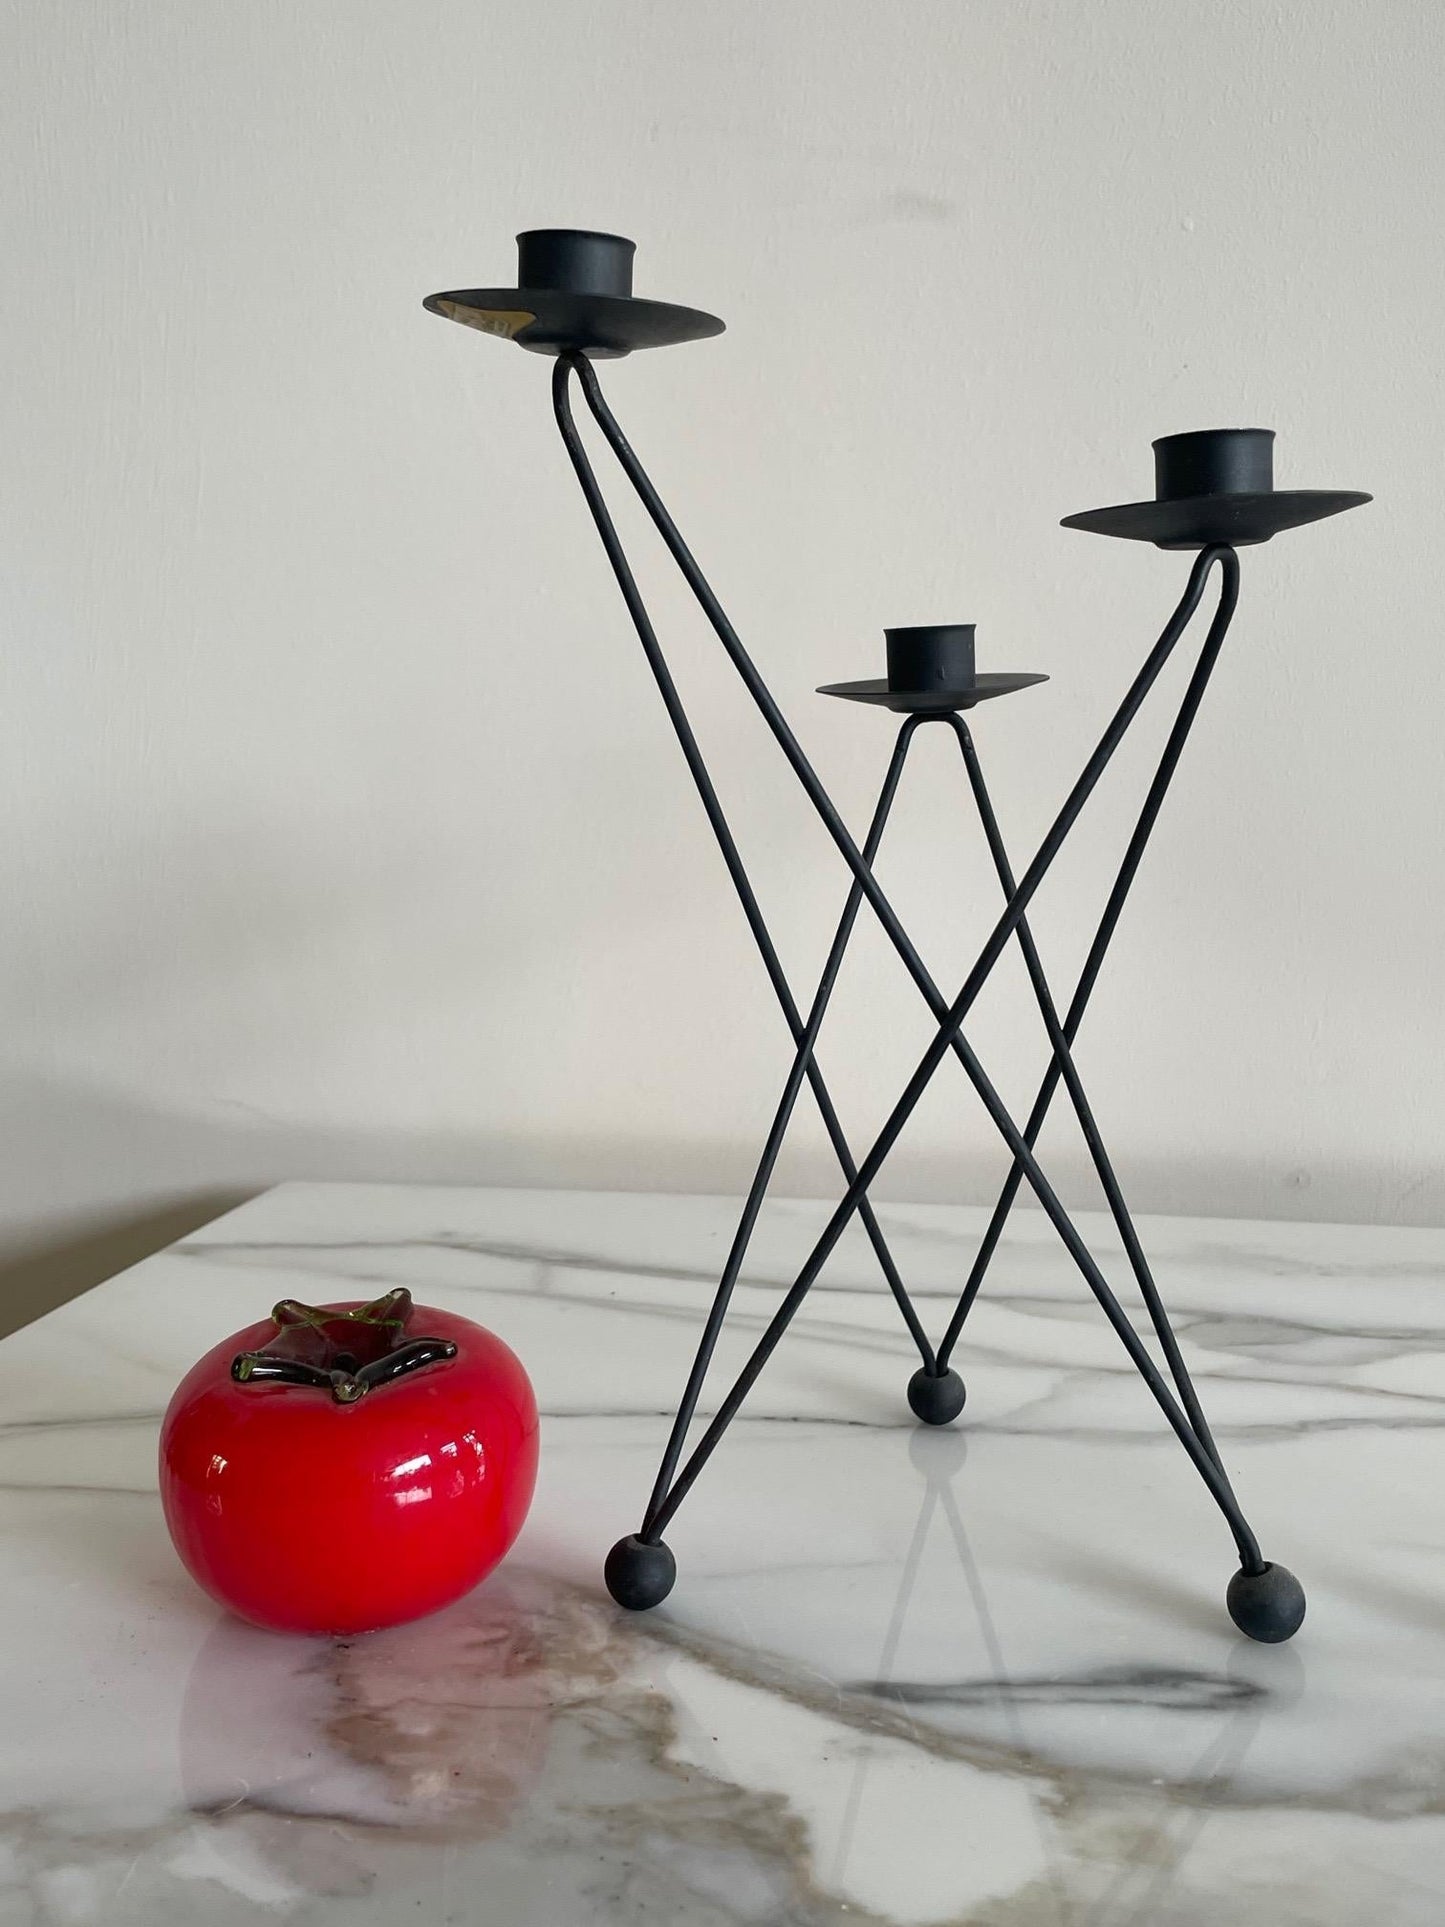 Pair of Atomic Candleholders by Architect Victor Bisharat